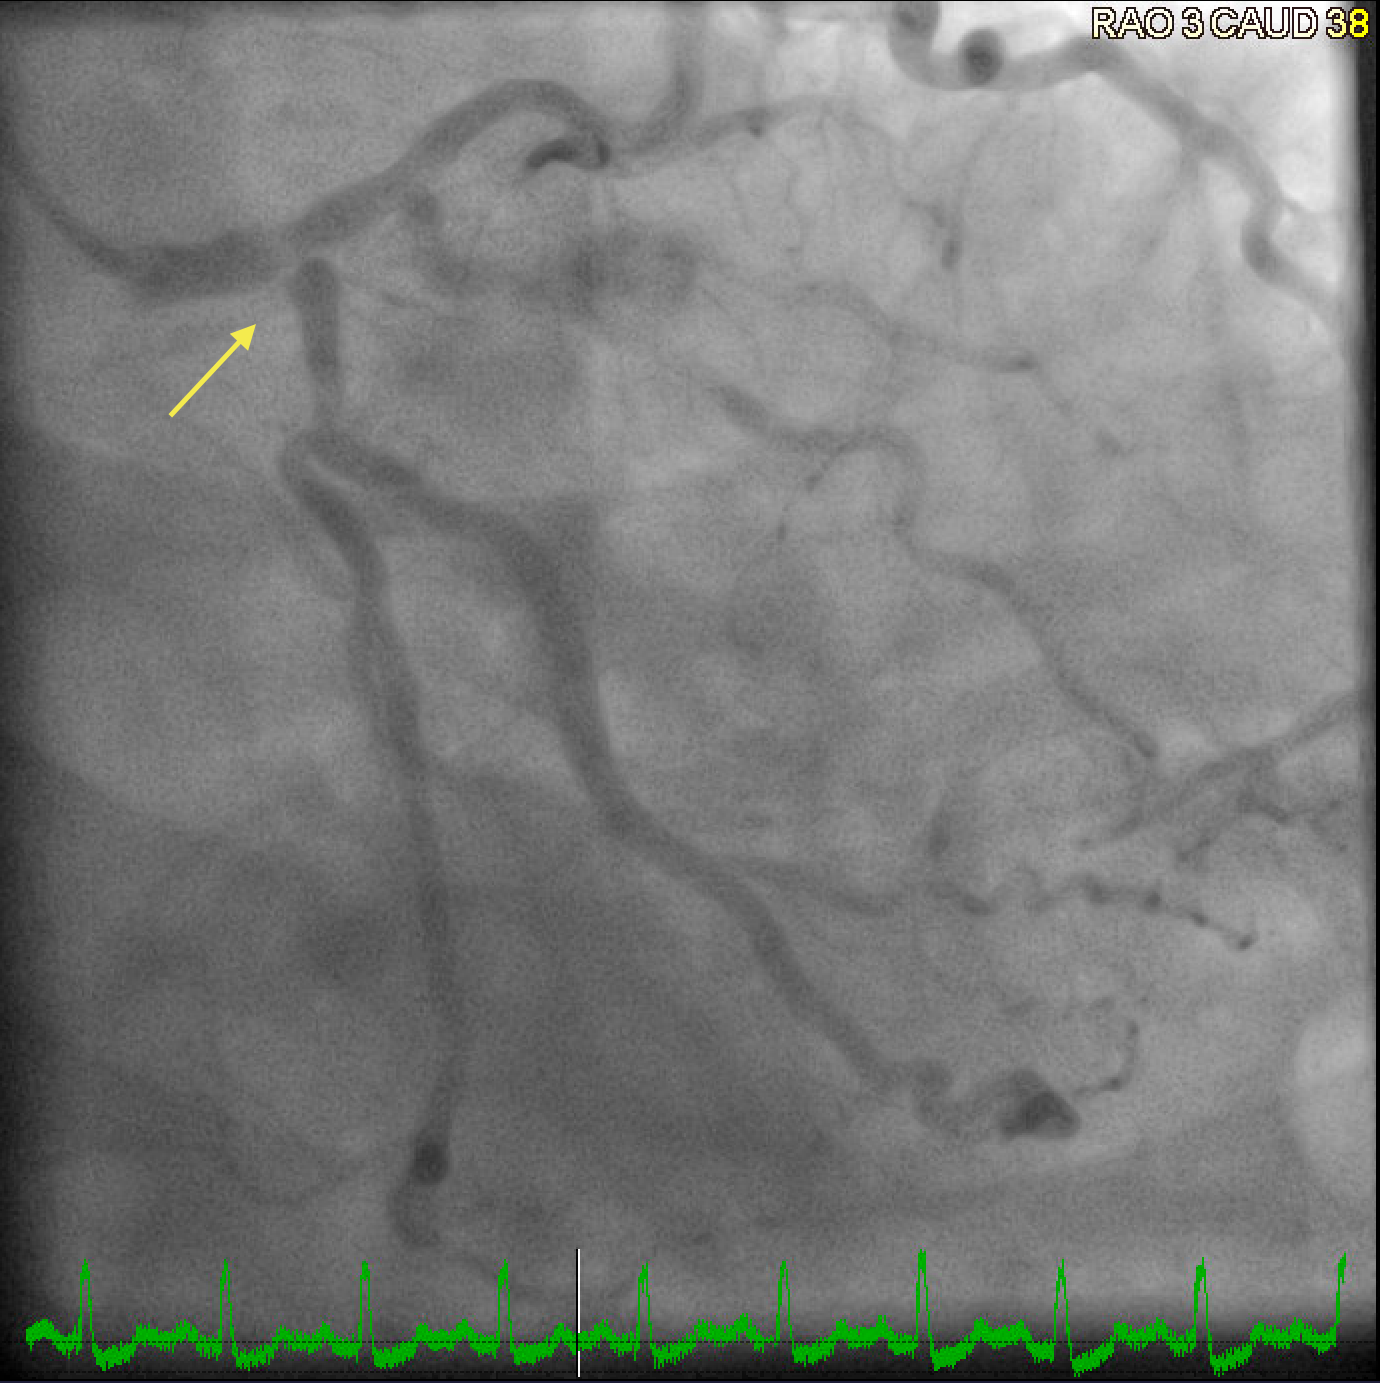 Coronary angiogram showing severe left main coronary artery disease with a bifurcation lesion involving the ostial left anterior descending artery and the ostial left circumflex artery